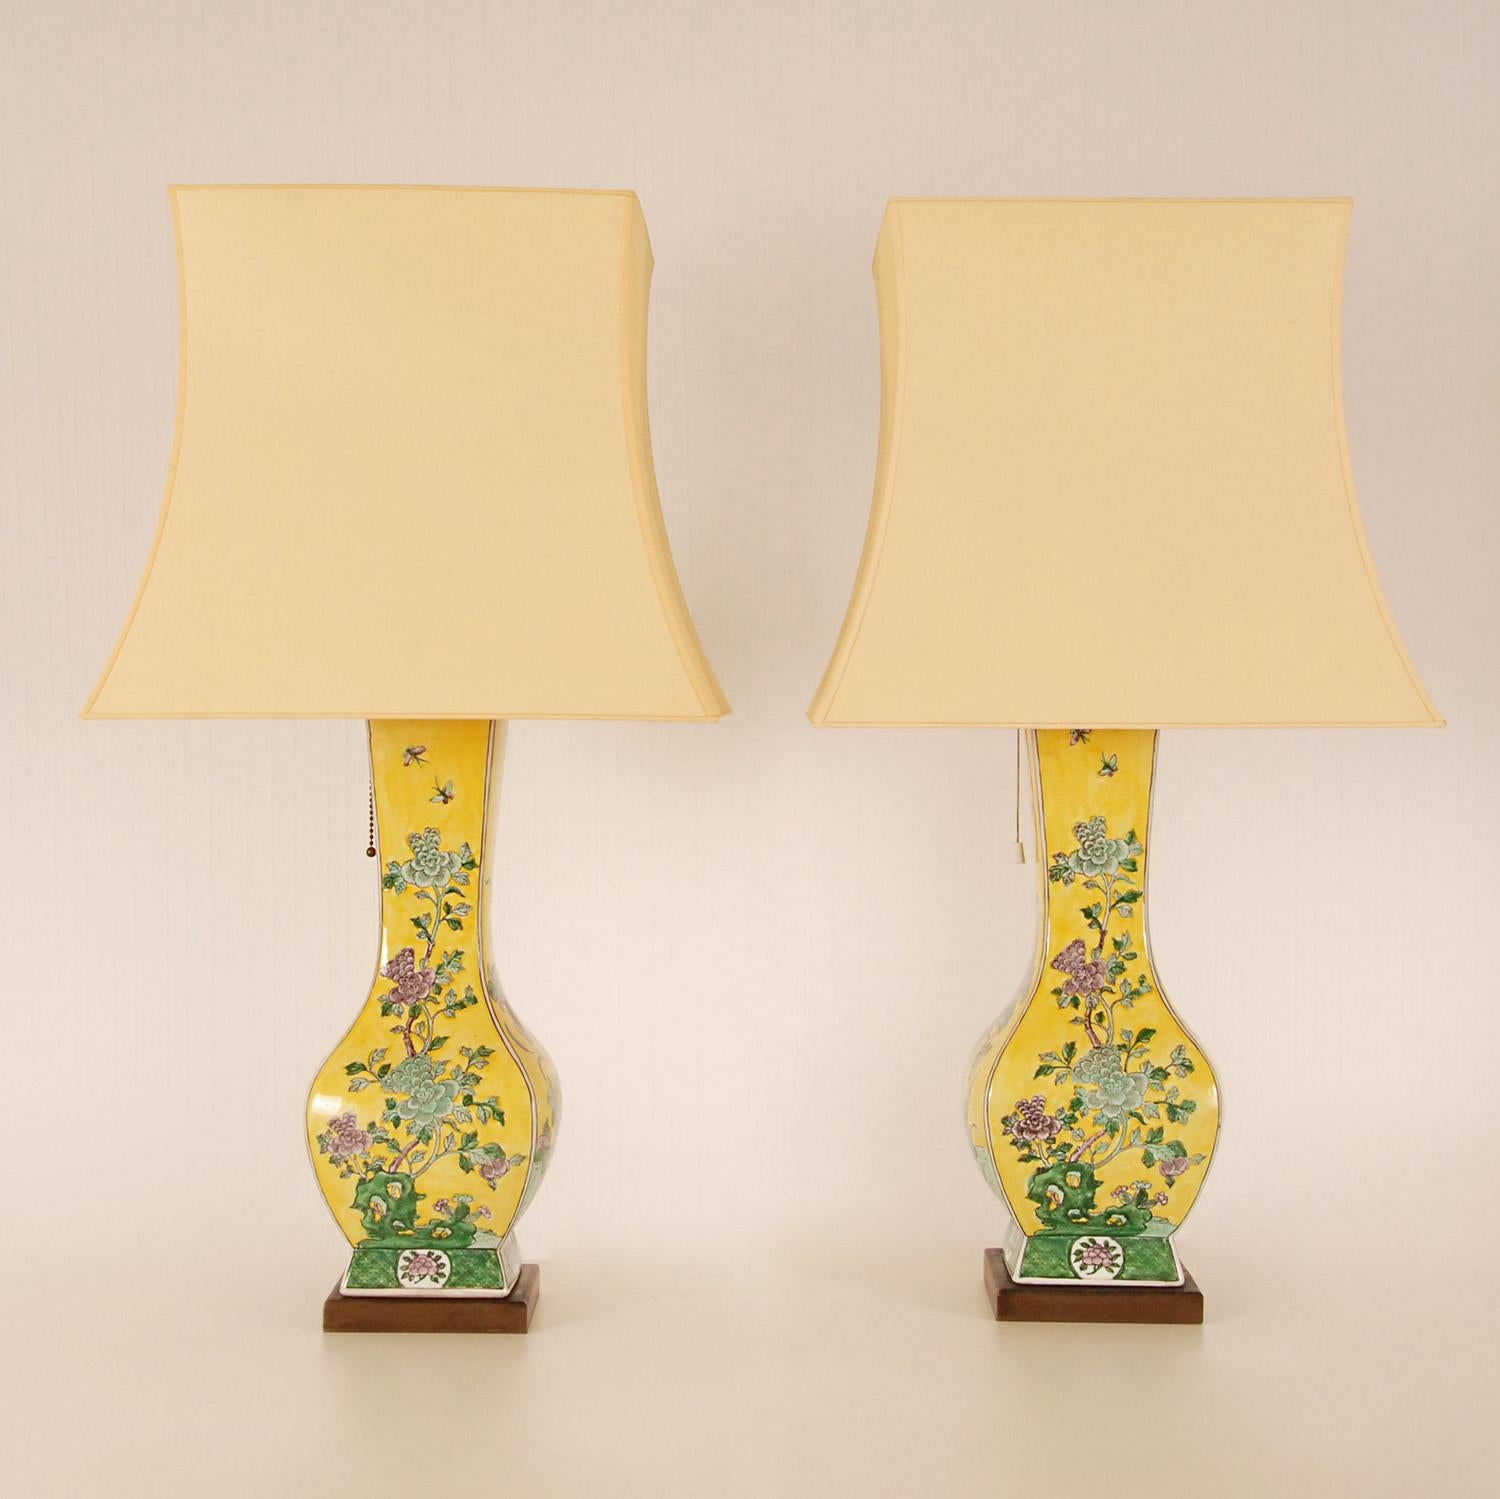 Vintage Ceramic Chinoiserie Lamps Famille Jaune and Famille Verte Table Lamps 3